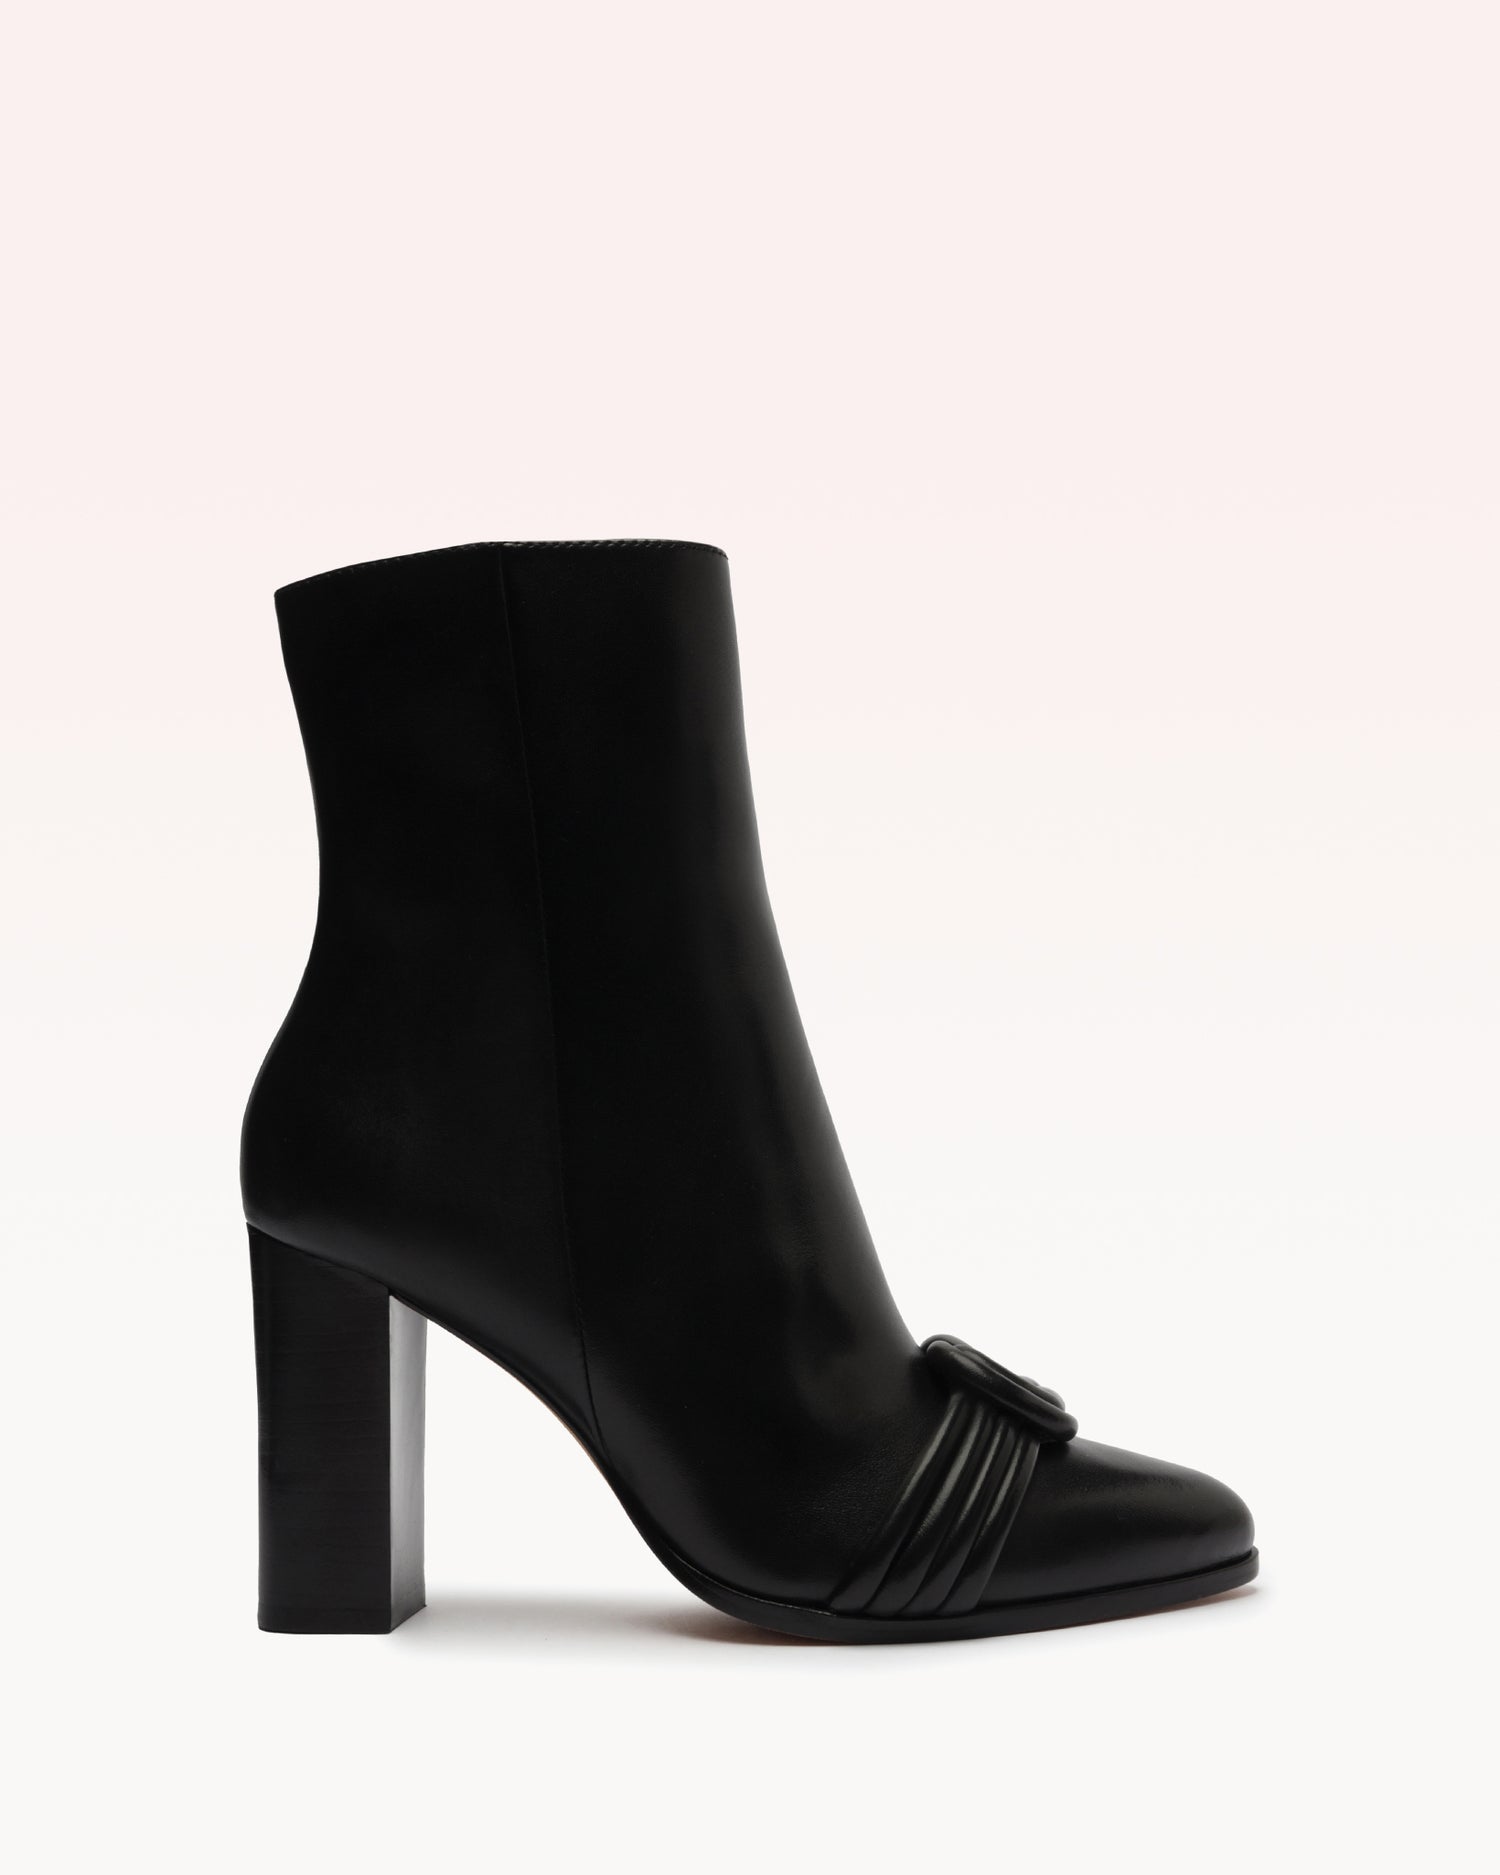 Vicky Bootie 90 Black Boots PRE FALL 23 35 Black Nappa Leather